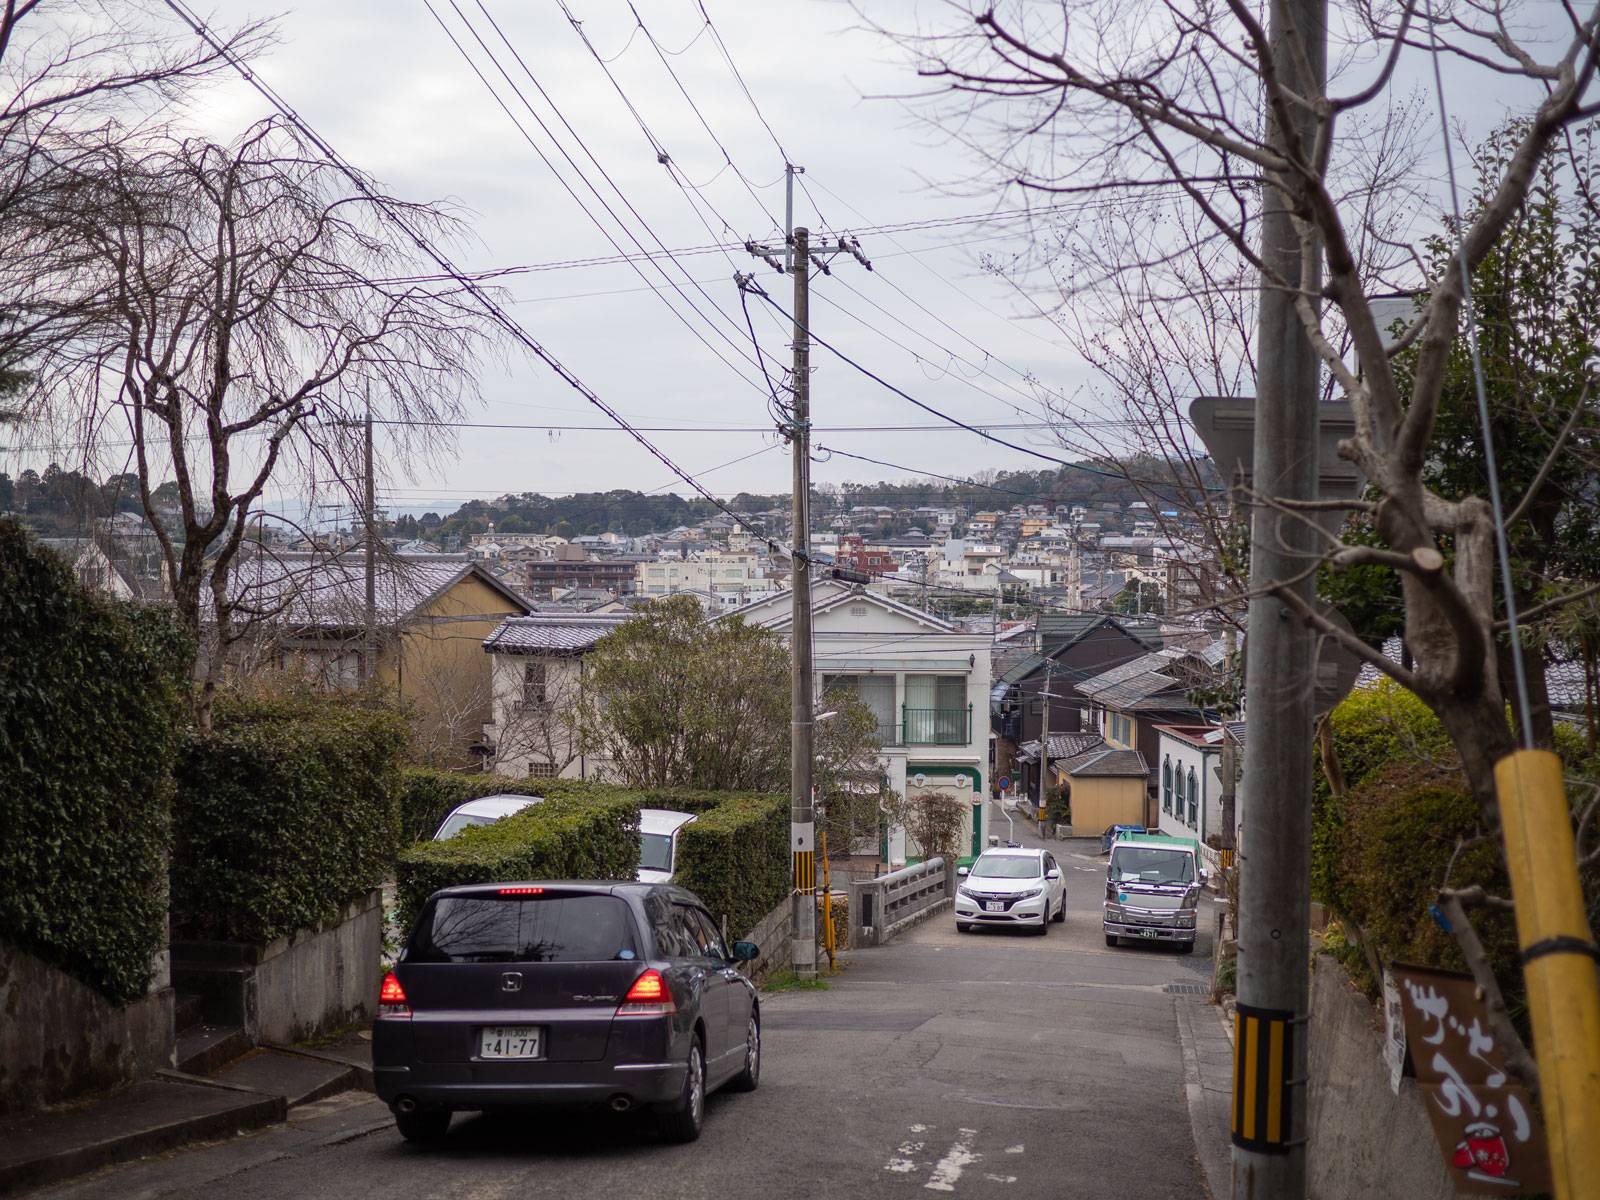 Cars parked along a steep residential street